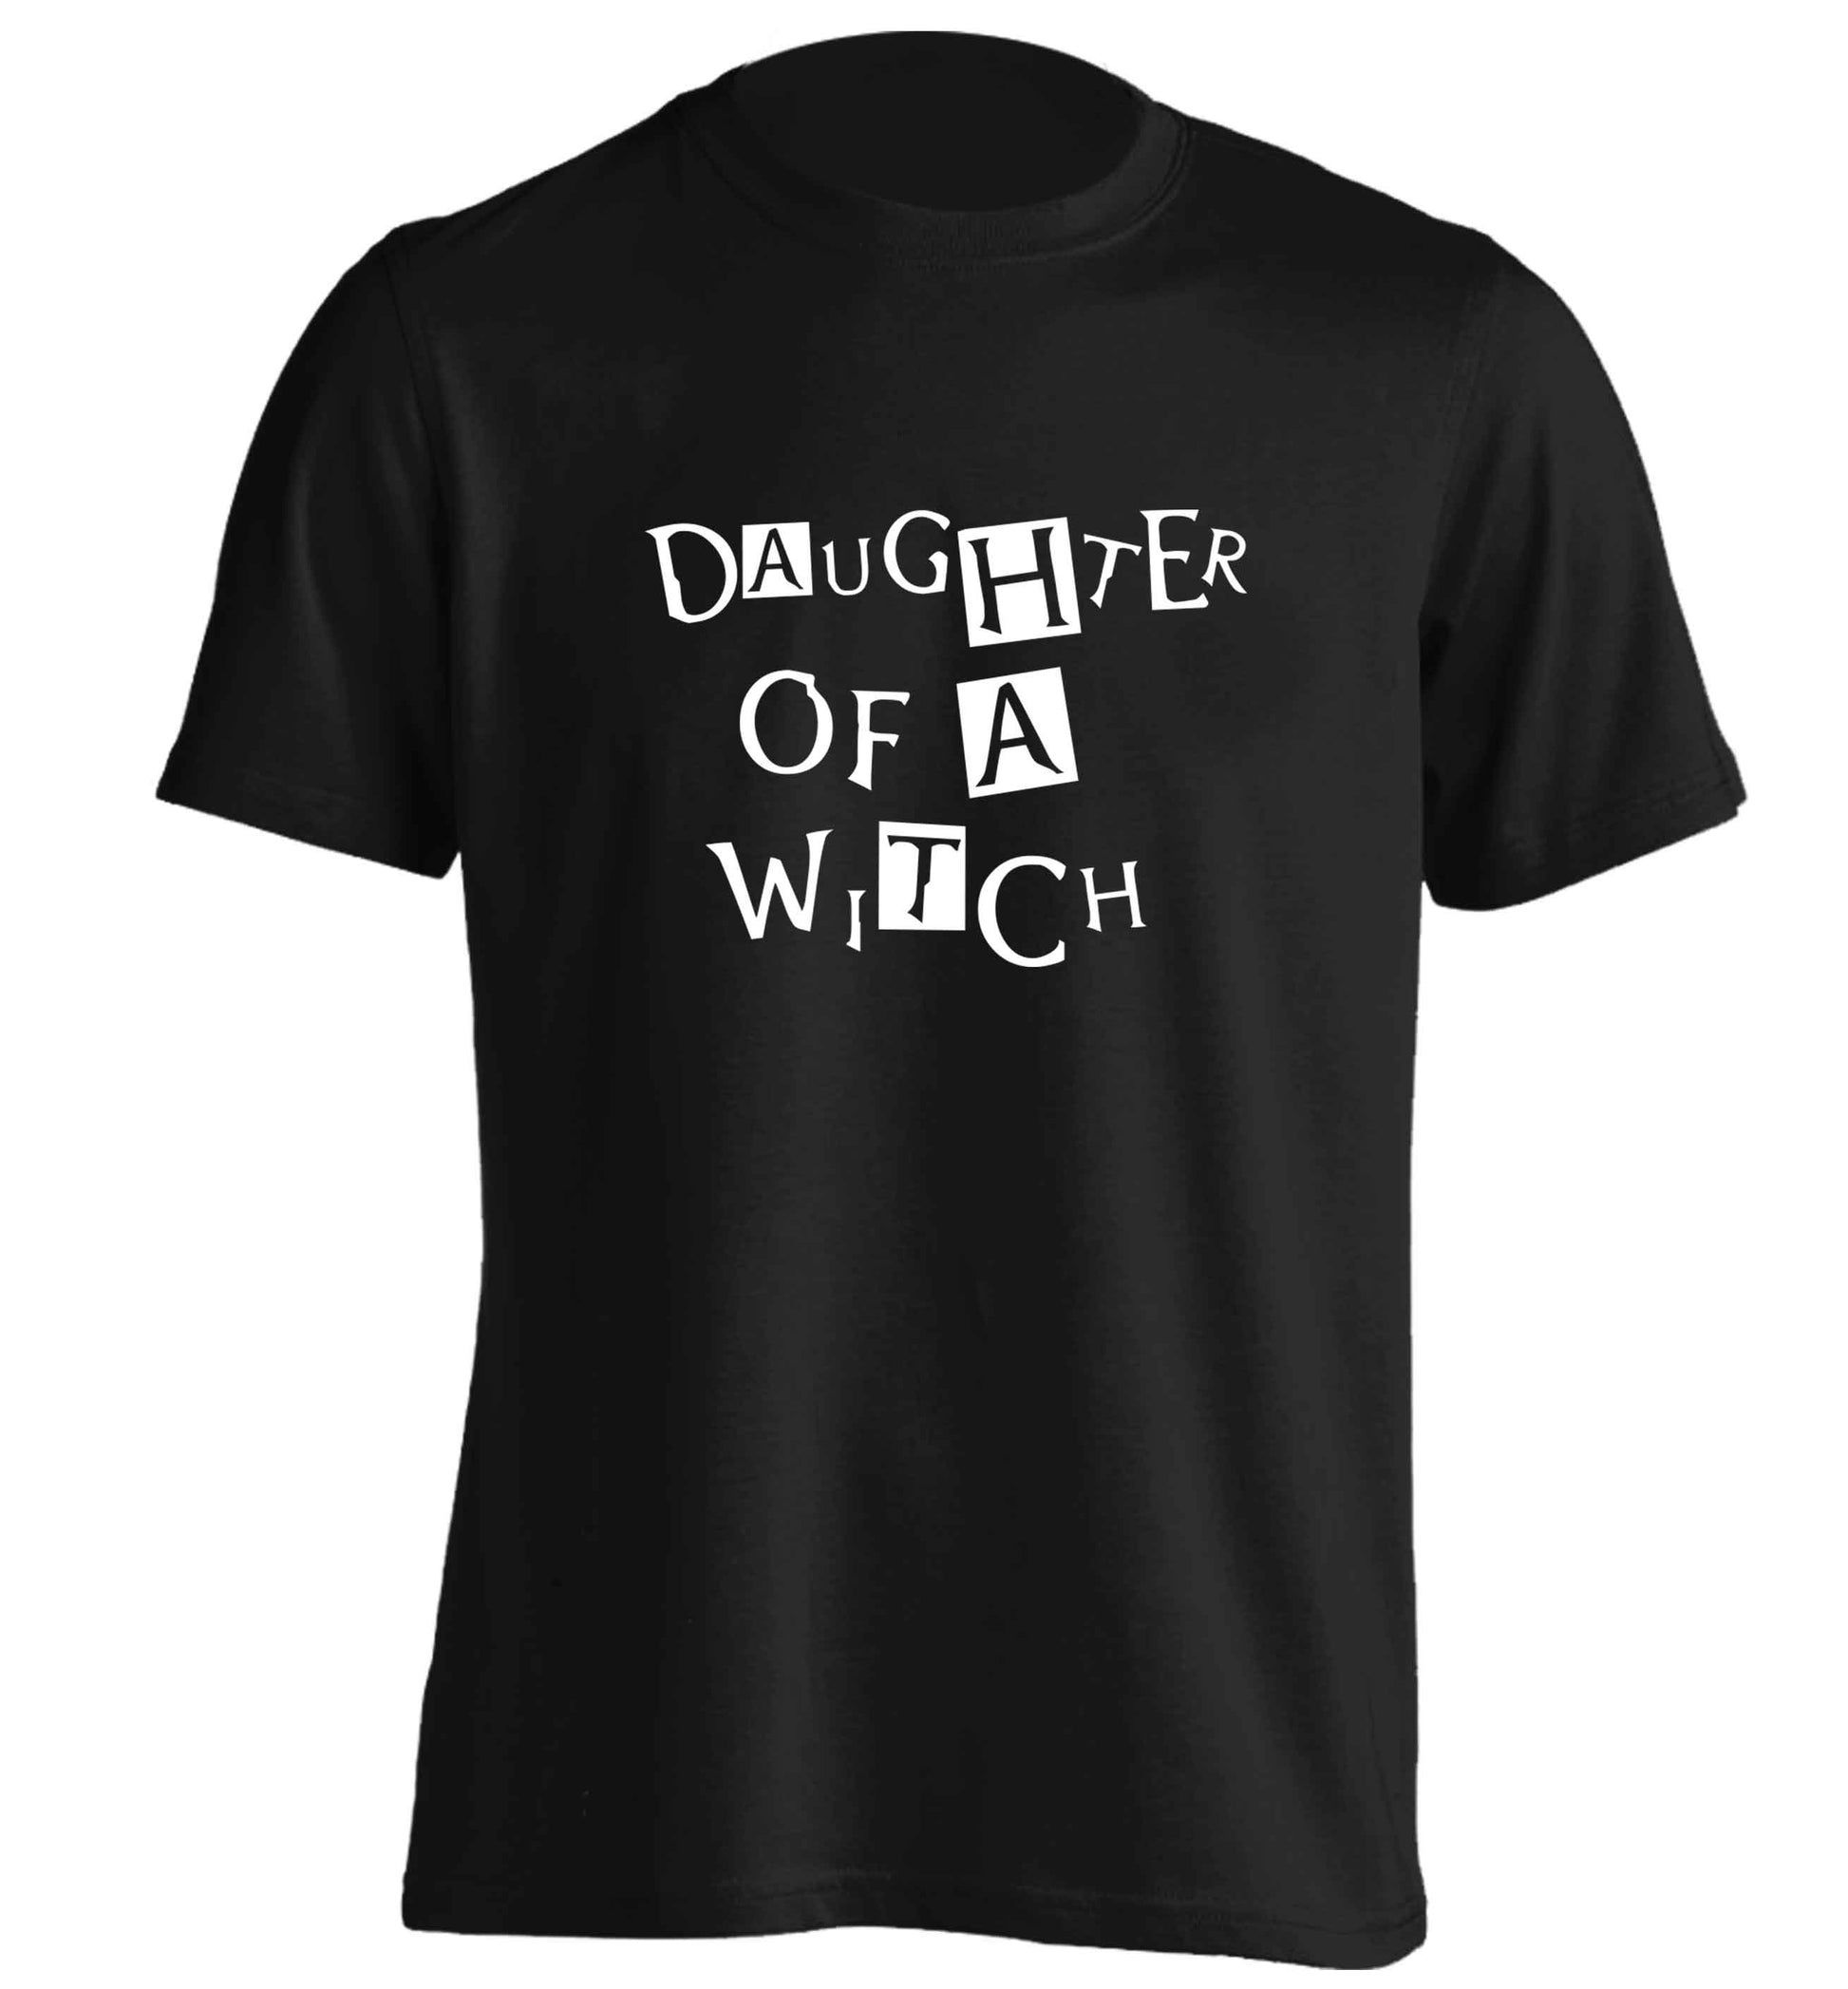 Daughter of a witch adults unisex black Tshirt 2XL